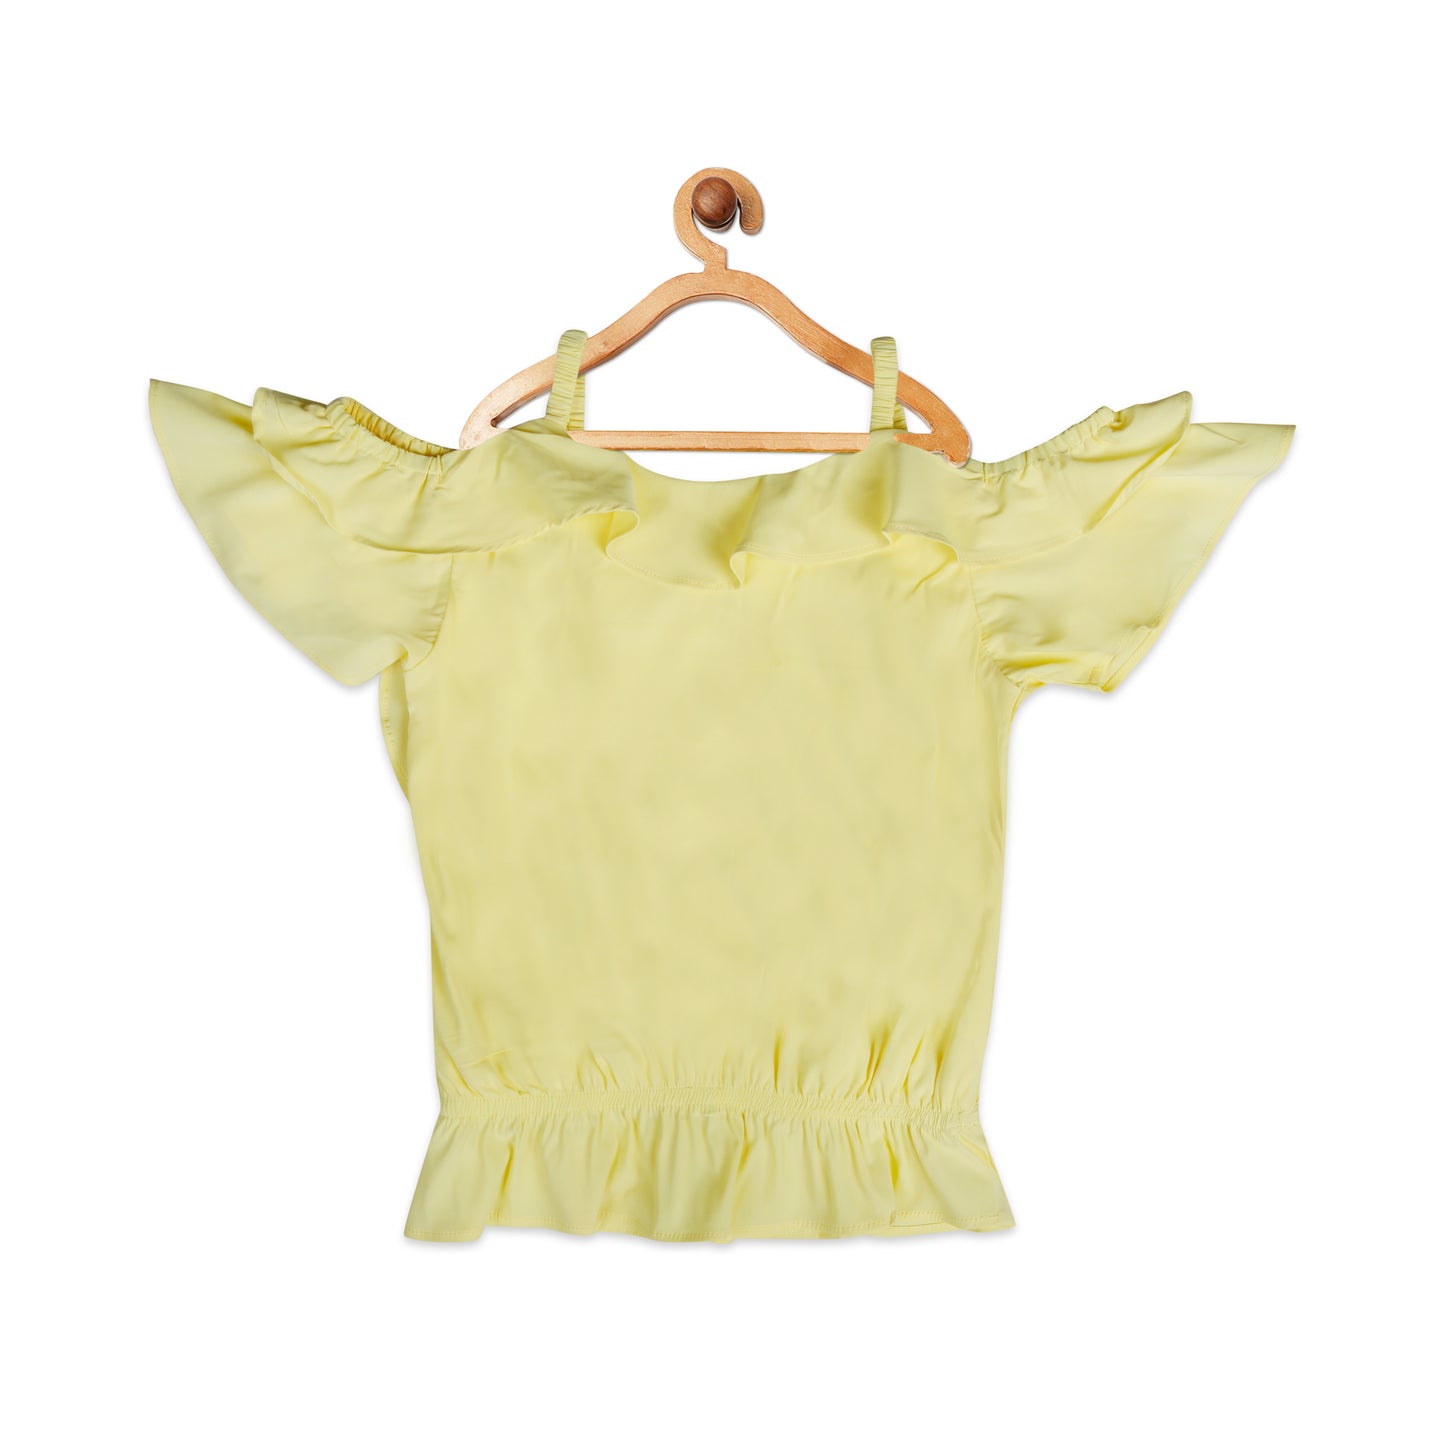 Lemon Ruffle Top With Cold Sleeves With Parrot Broach Detail